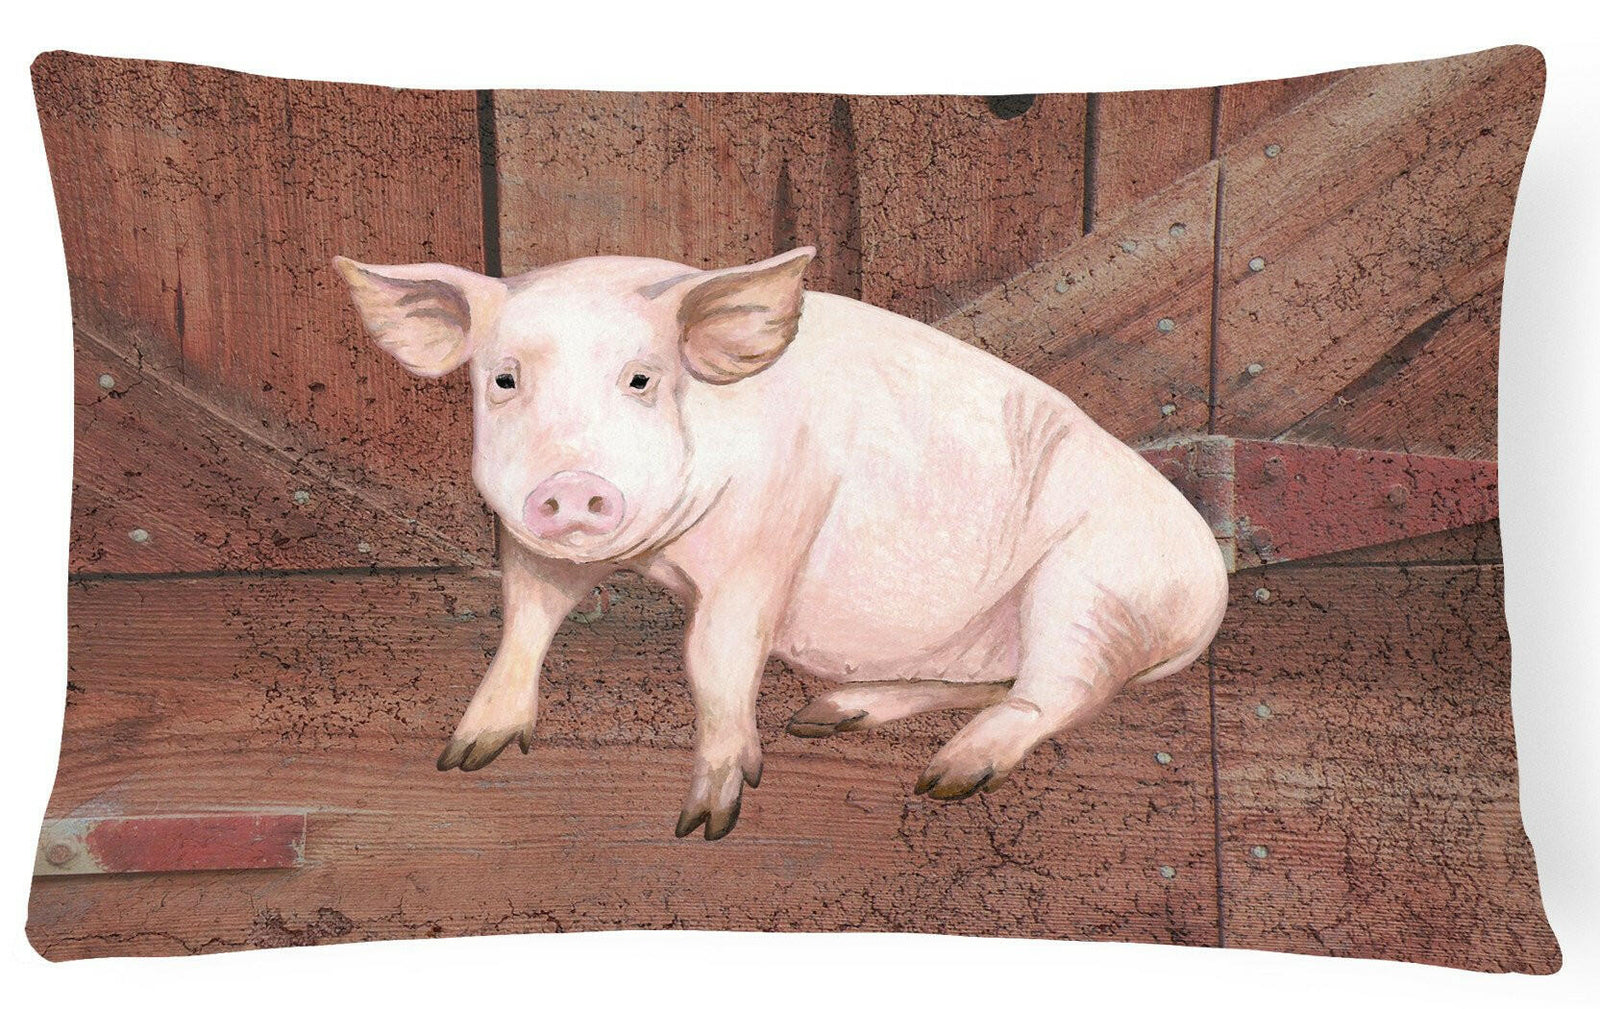 Pig at the barn door   Canvas Fabric Decorative Pillow SB3072PW1216 by Caroline's Treasures